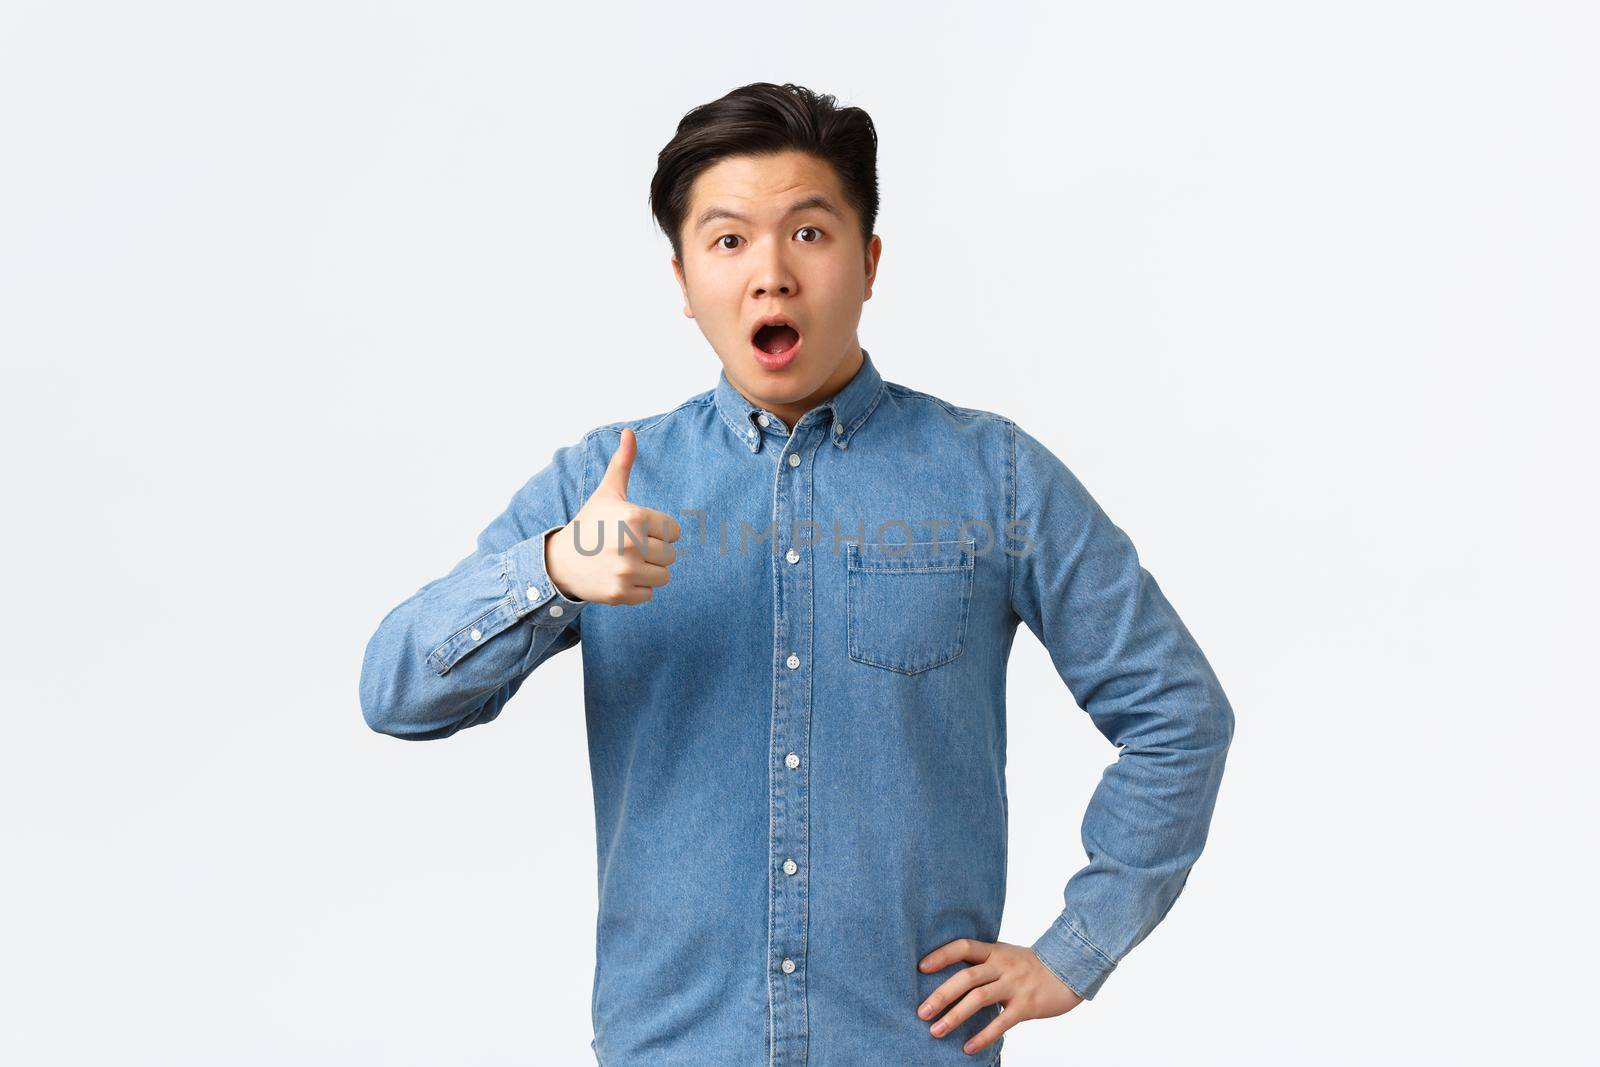 Surprised and impressed asian male student open mouth fascinated, showing thumbs-up astounded, saying wow, rate great work, saying well done or good job, standing white background.